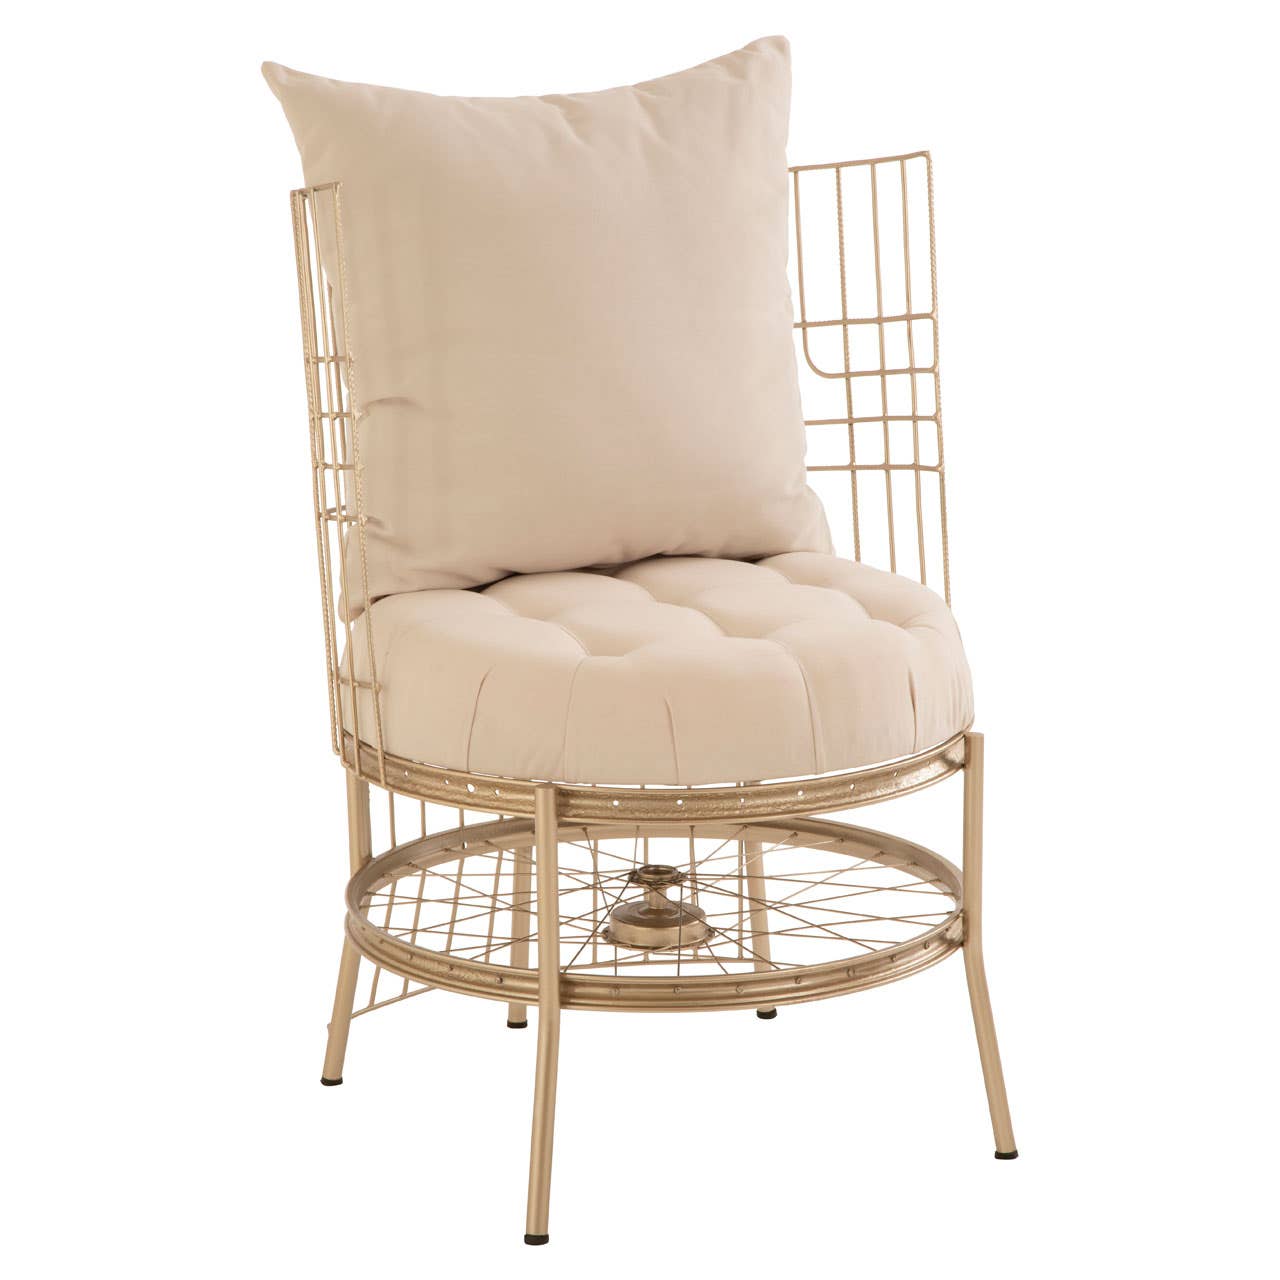 Mantis Champagne Gold Finish Chair